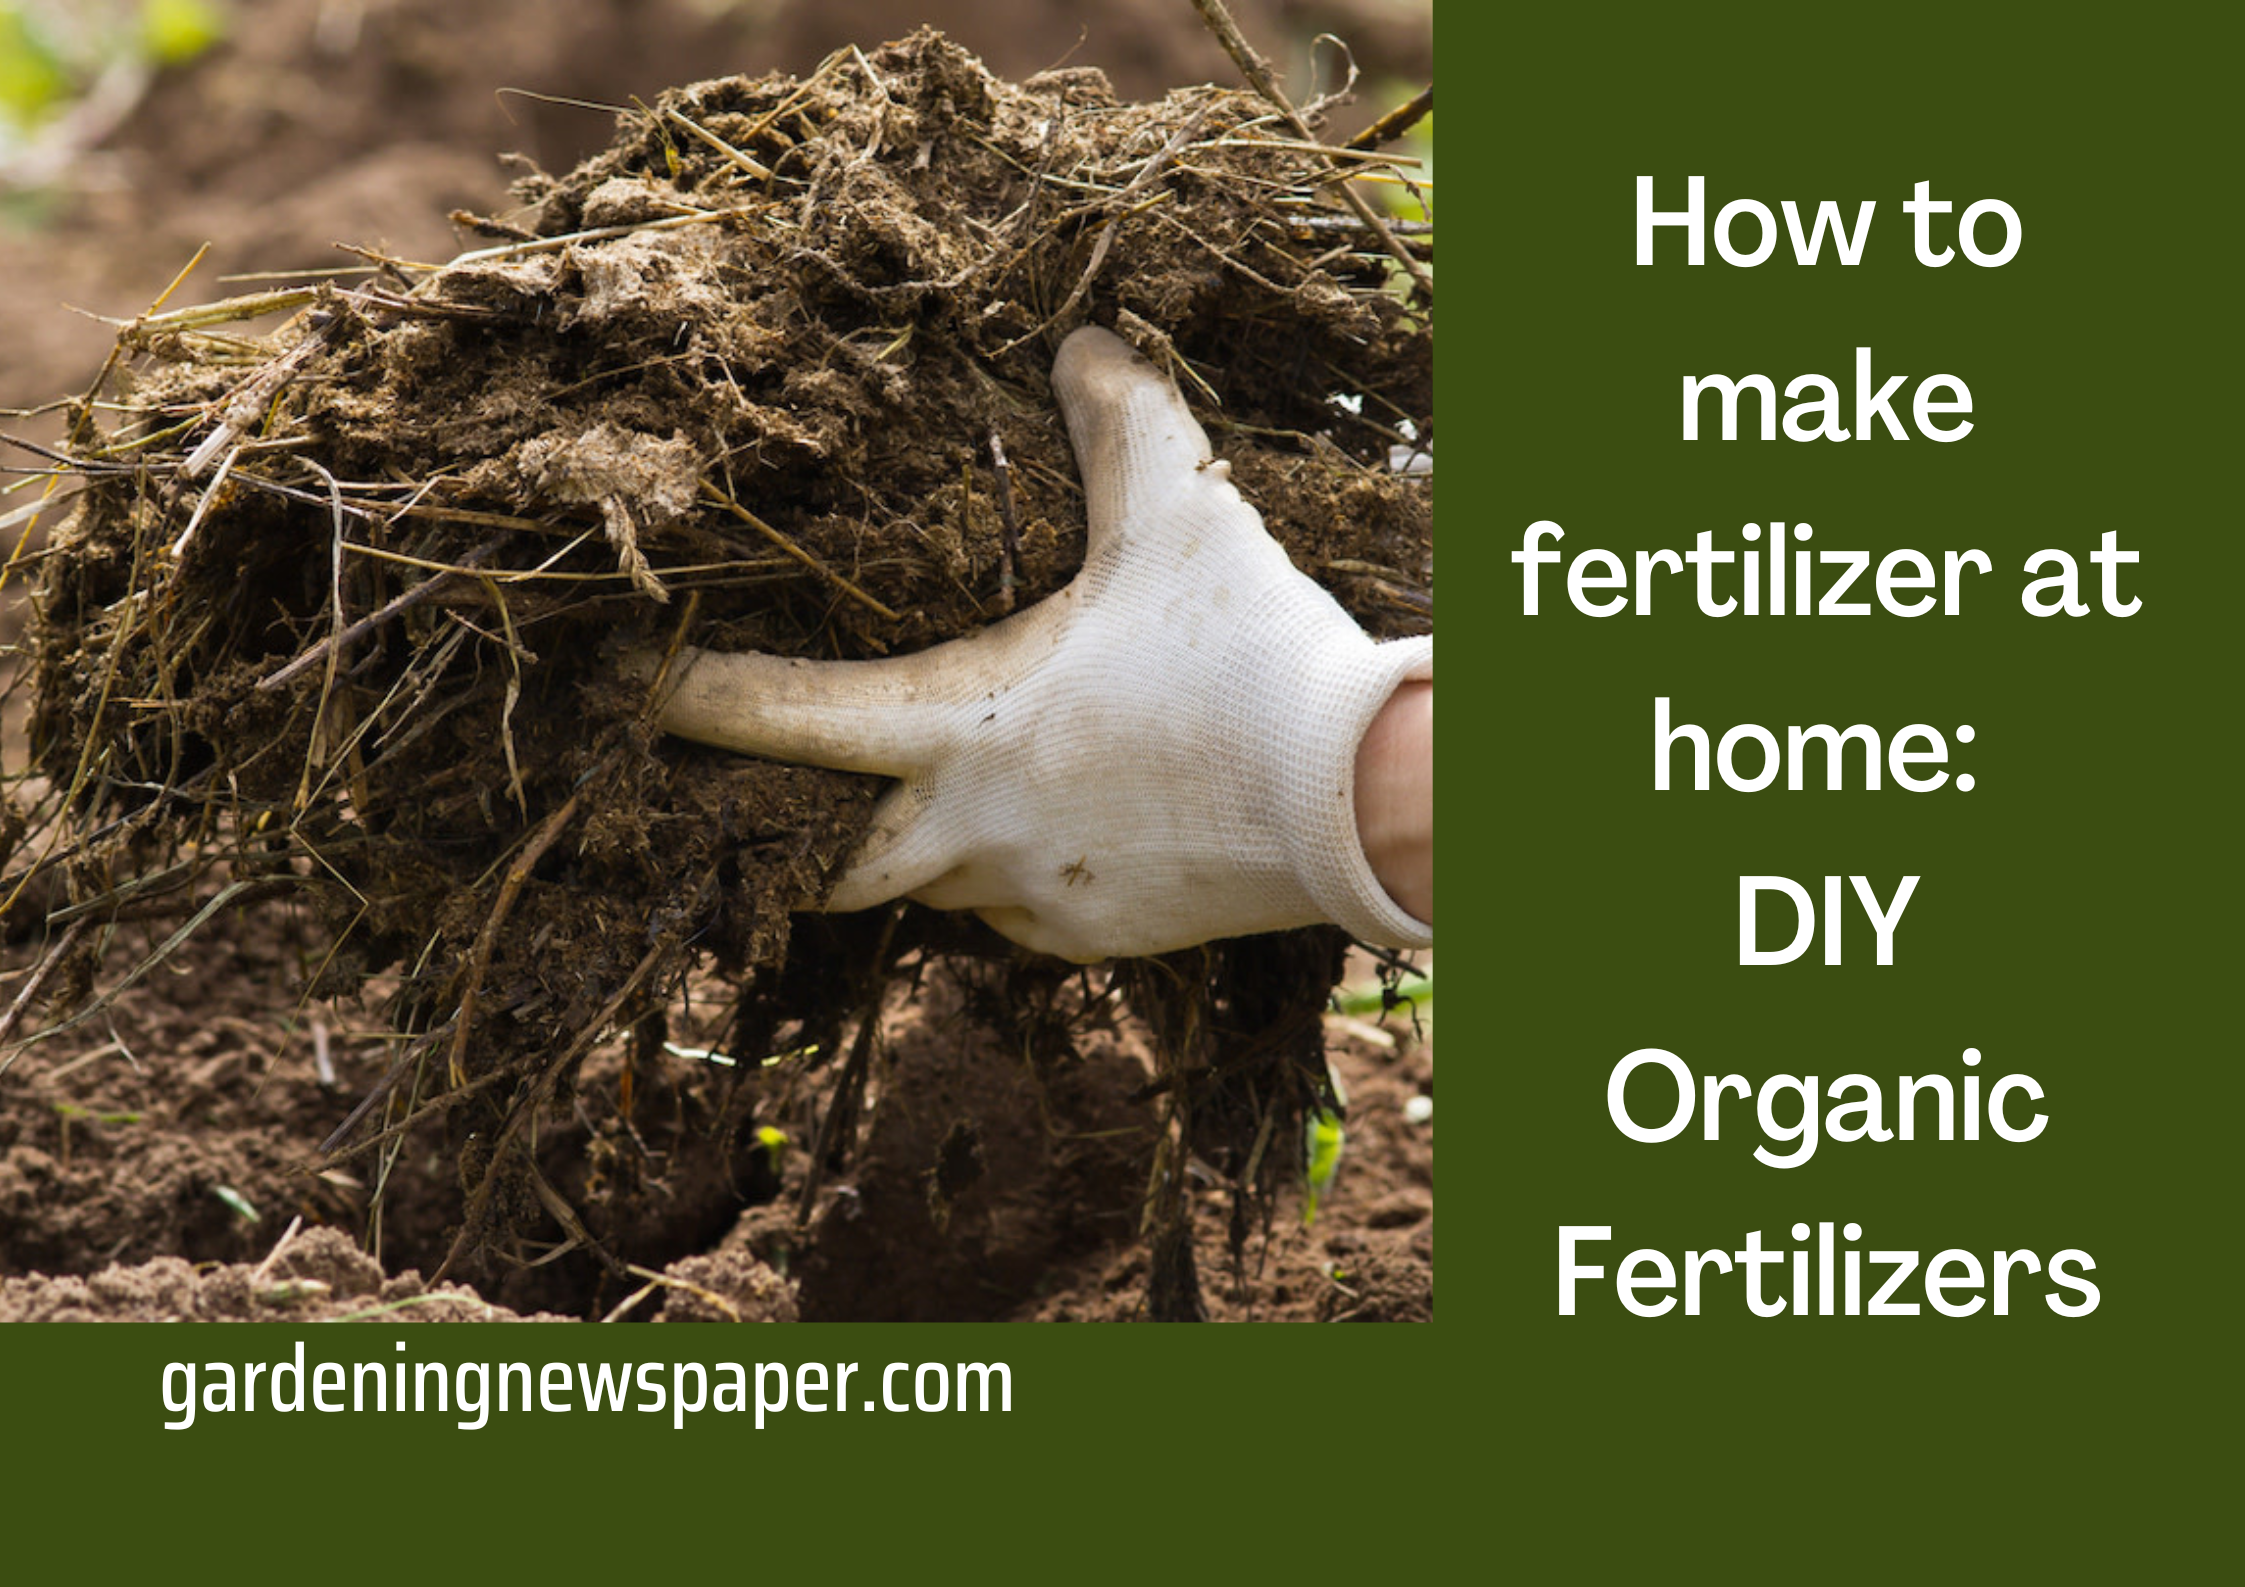 How to make fertilizer at home